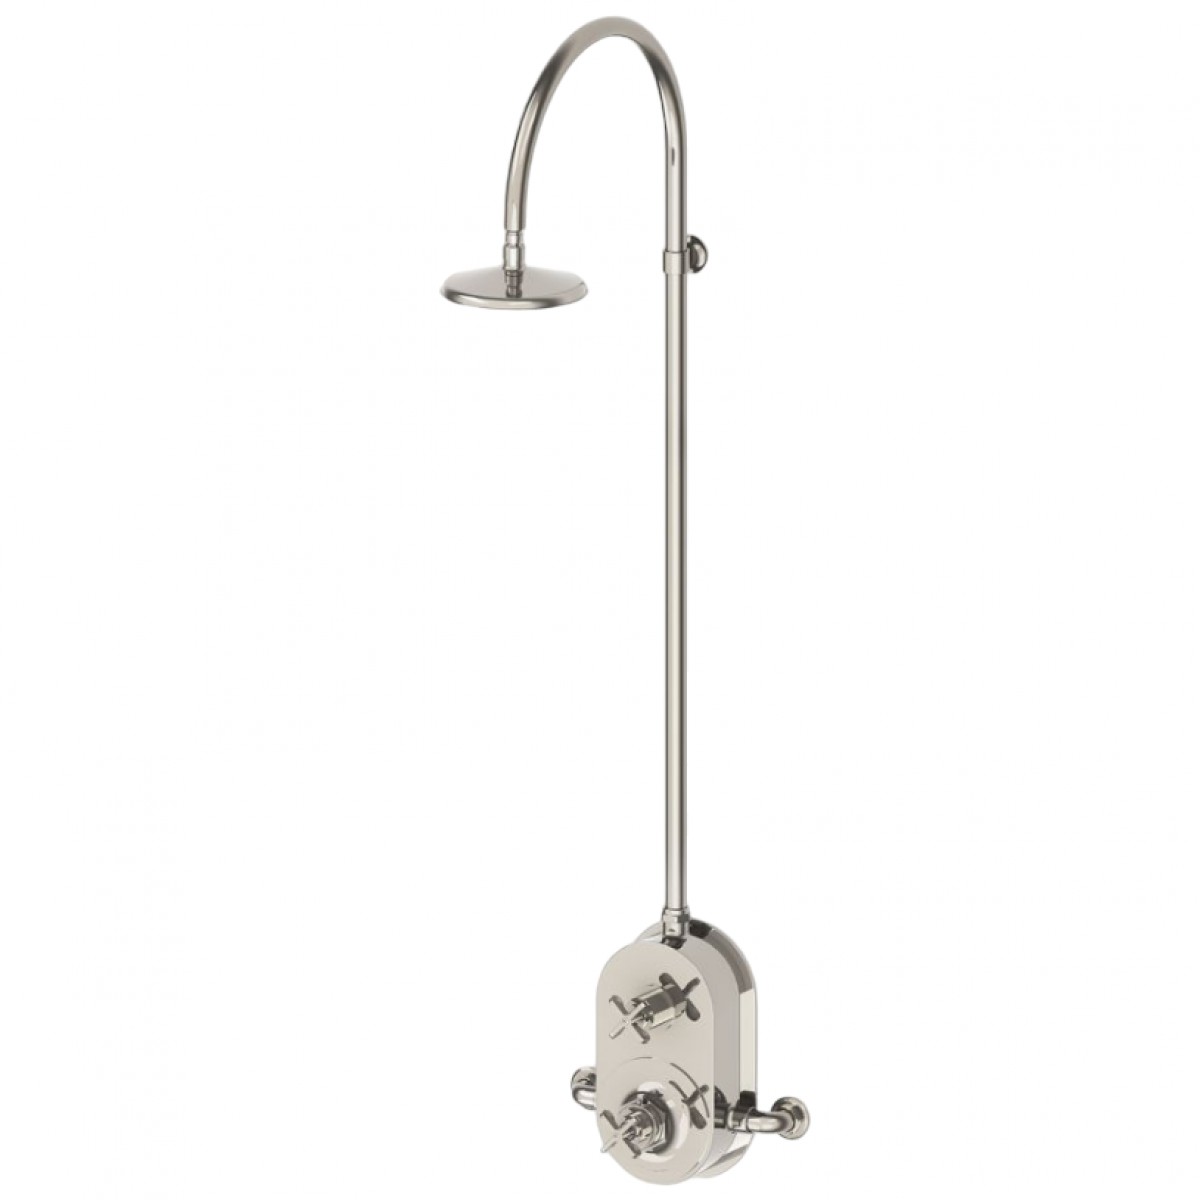 Henry Exposed Thermostatic Shower System with 8" Shower Head and Metal Cross Handle